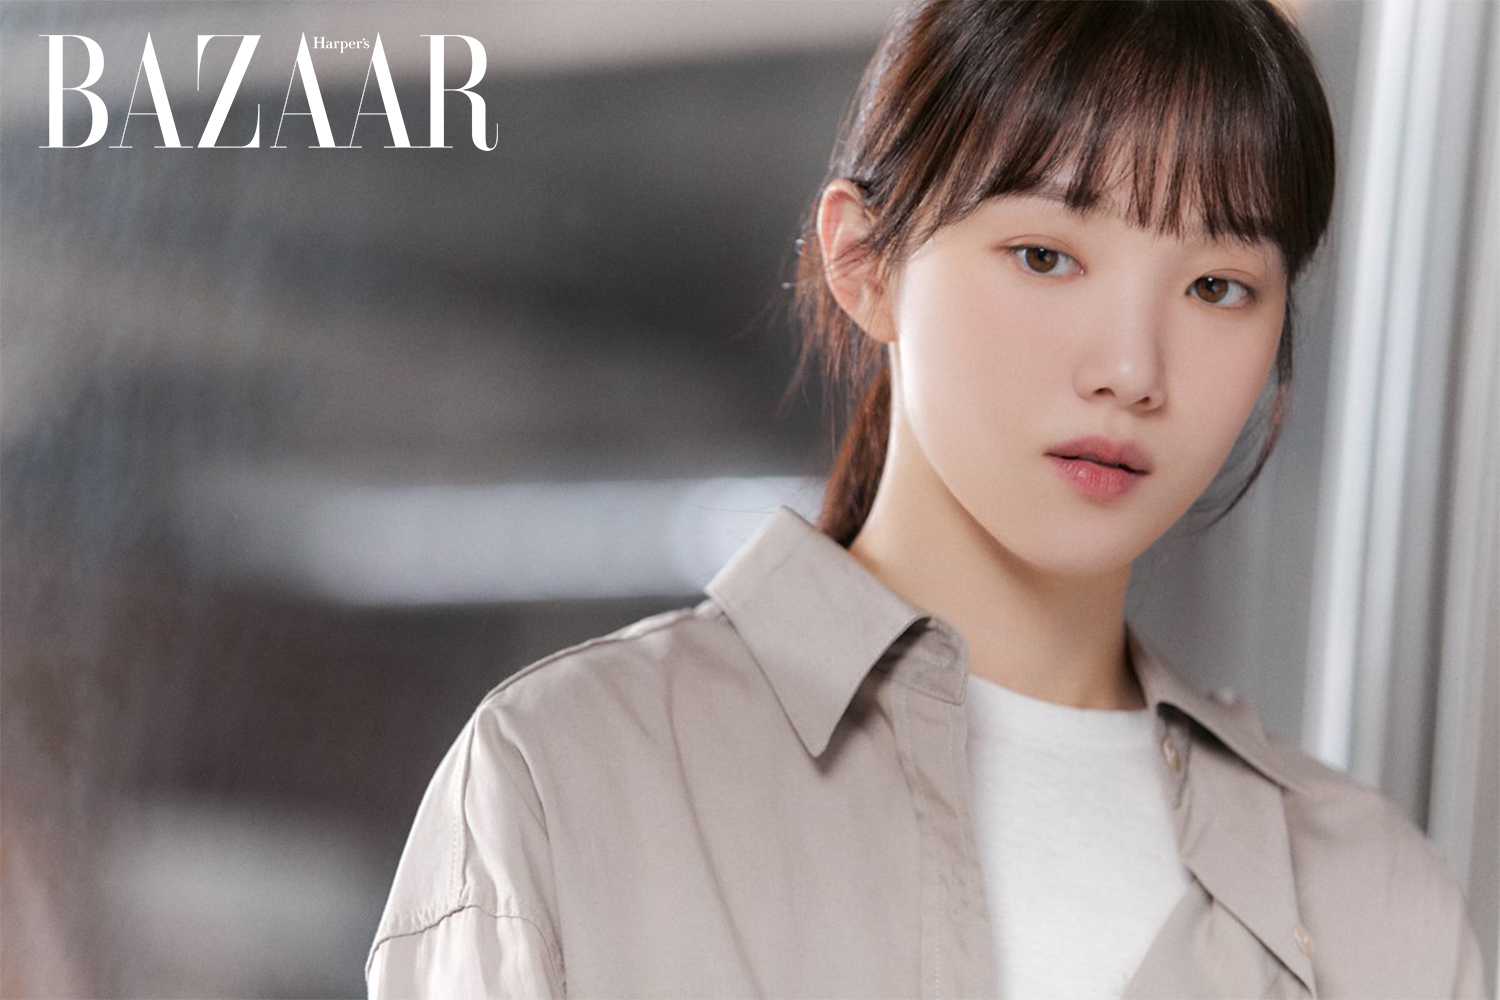 The Seoul Story on Twitter  CHANEL Beauty ambassador Lee Sung Kyung  showing her endless charm in recent pictorial for W Korea  Source  httpstcoA9P5VcDUg9 httpstco9q75xgbANZ  Twitter